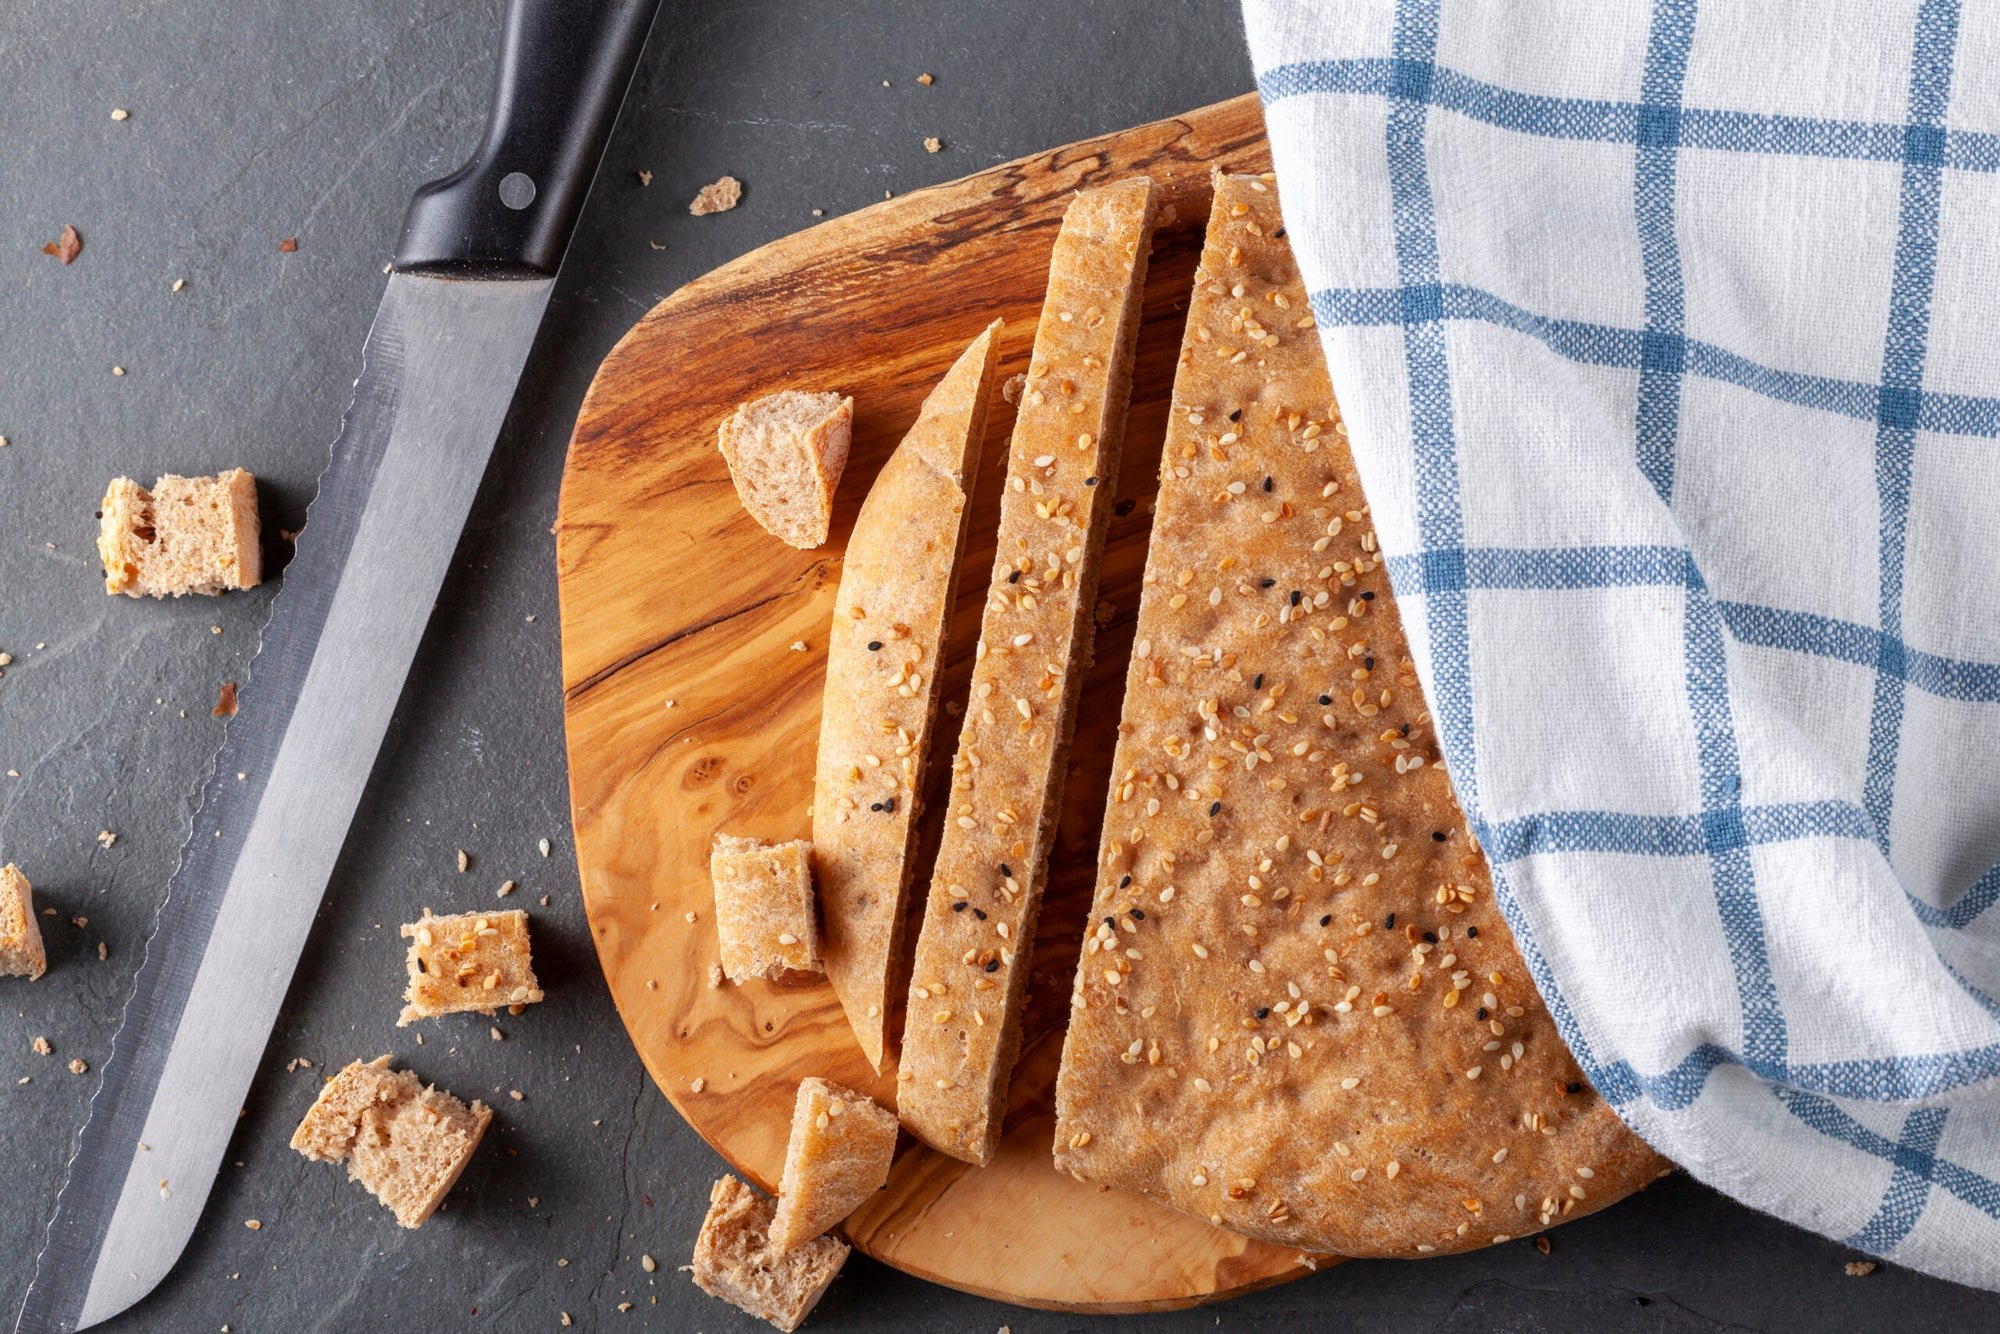 These 7 Best Bread Knives Are a Notch Above the Rest